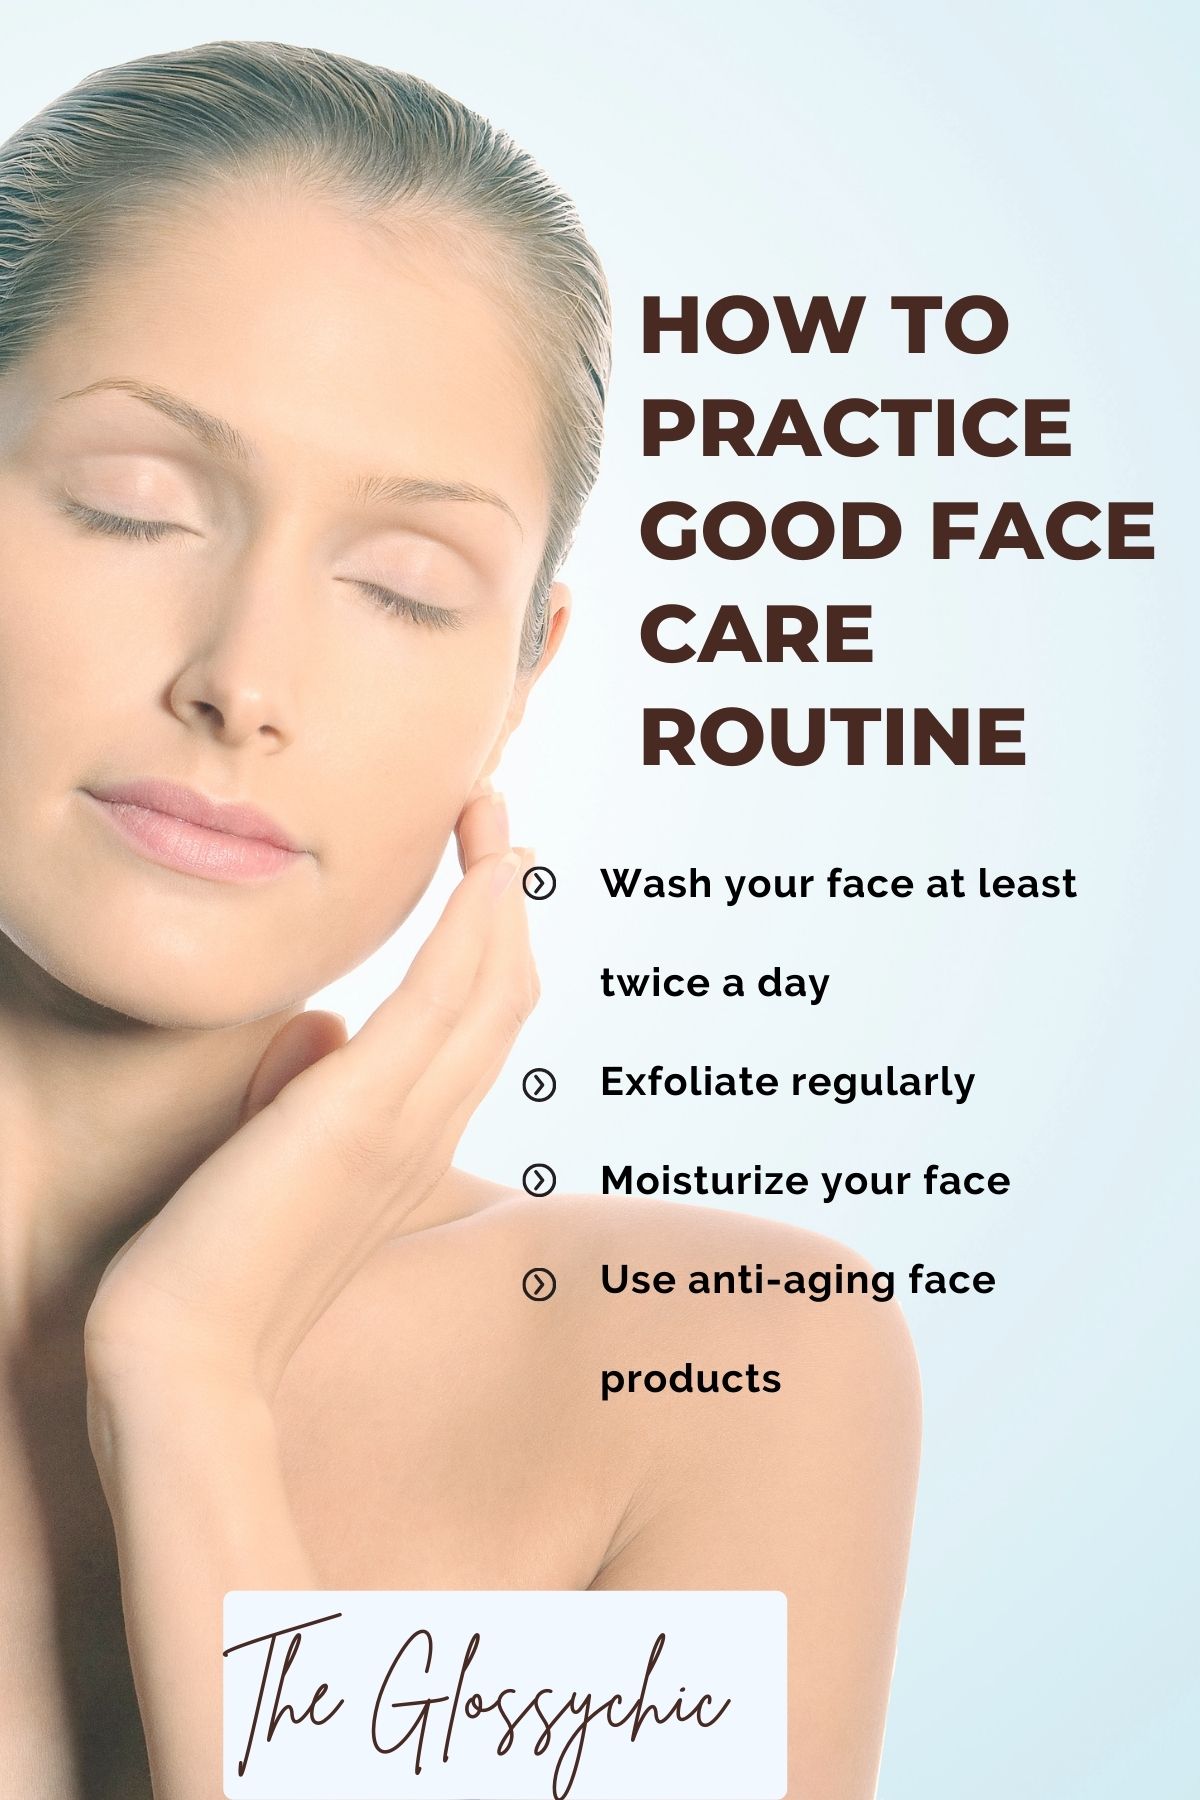 How to Practice good face care routine